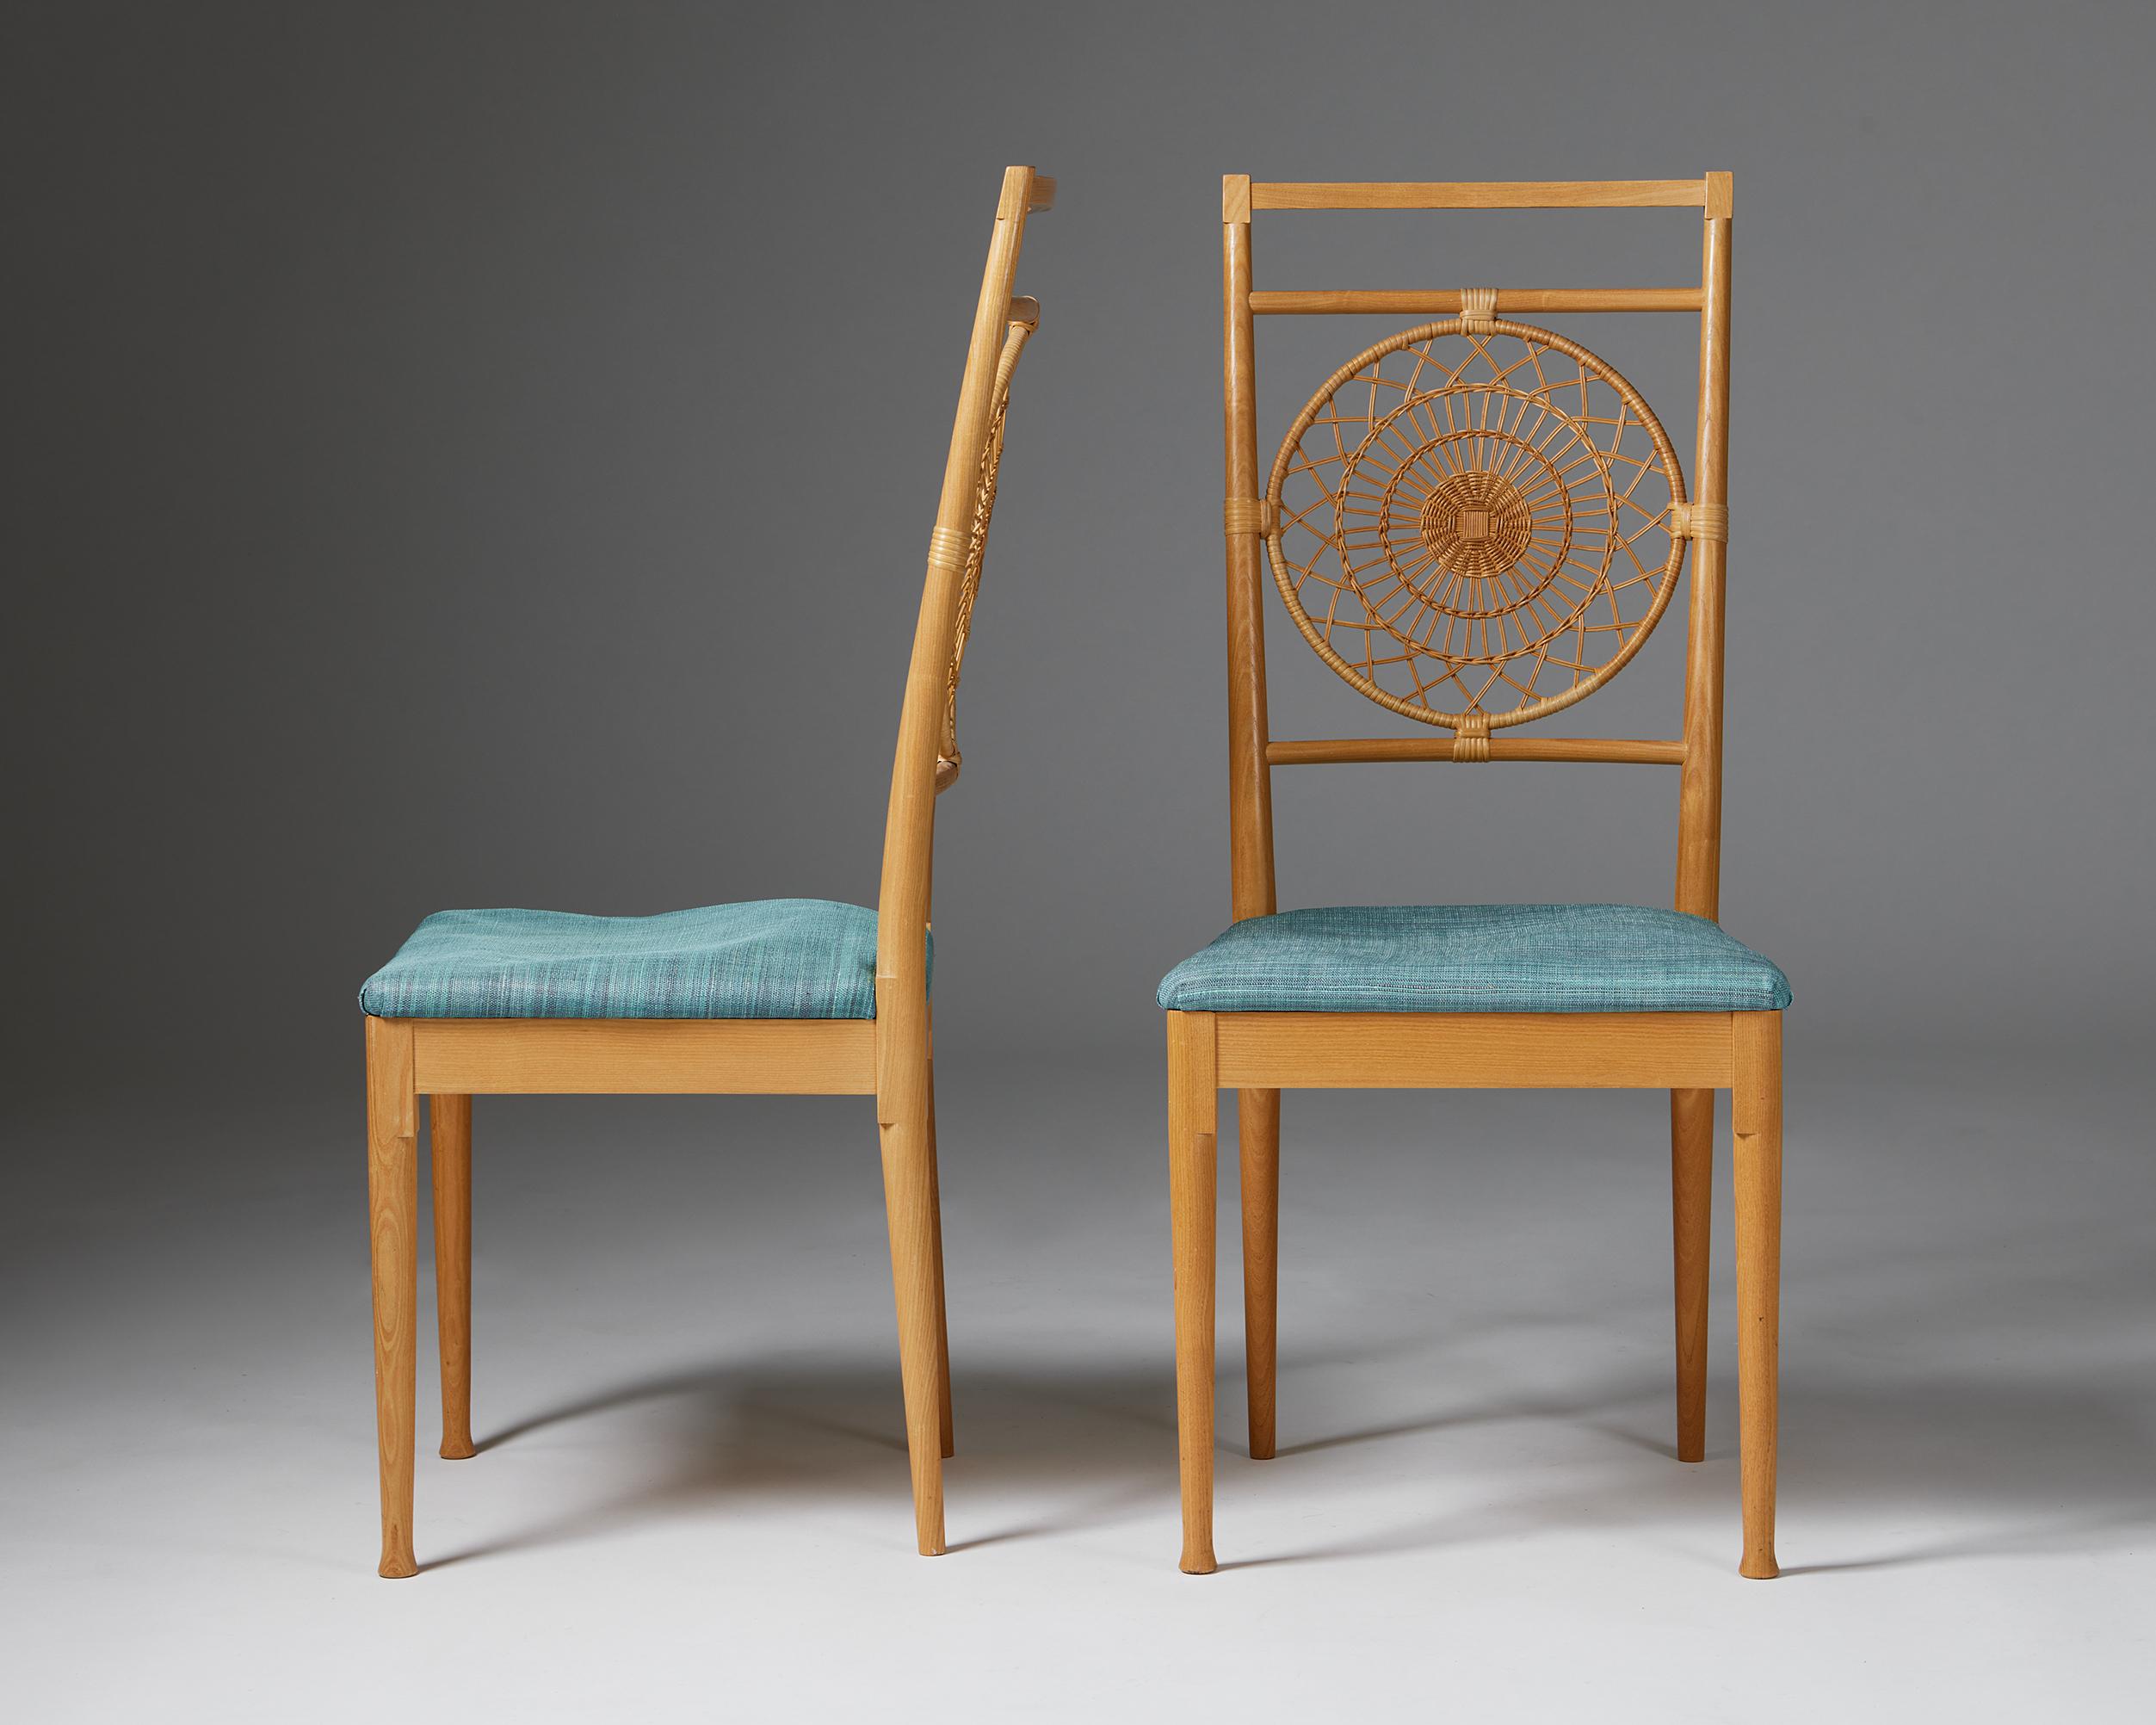 Swedish Pair of chairs designed by Carin Chambert and Sigbritt Larsson